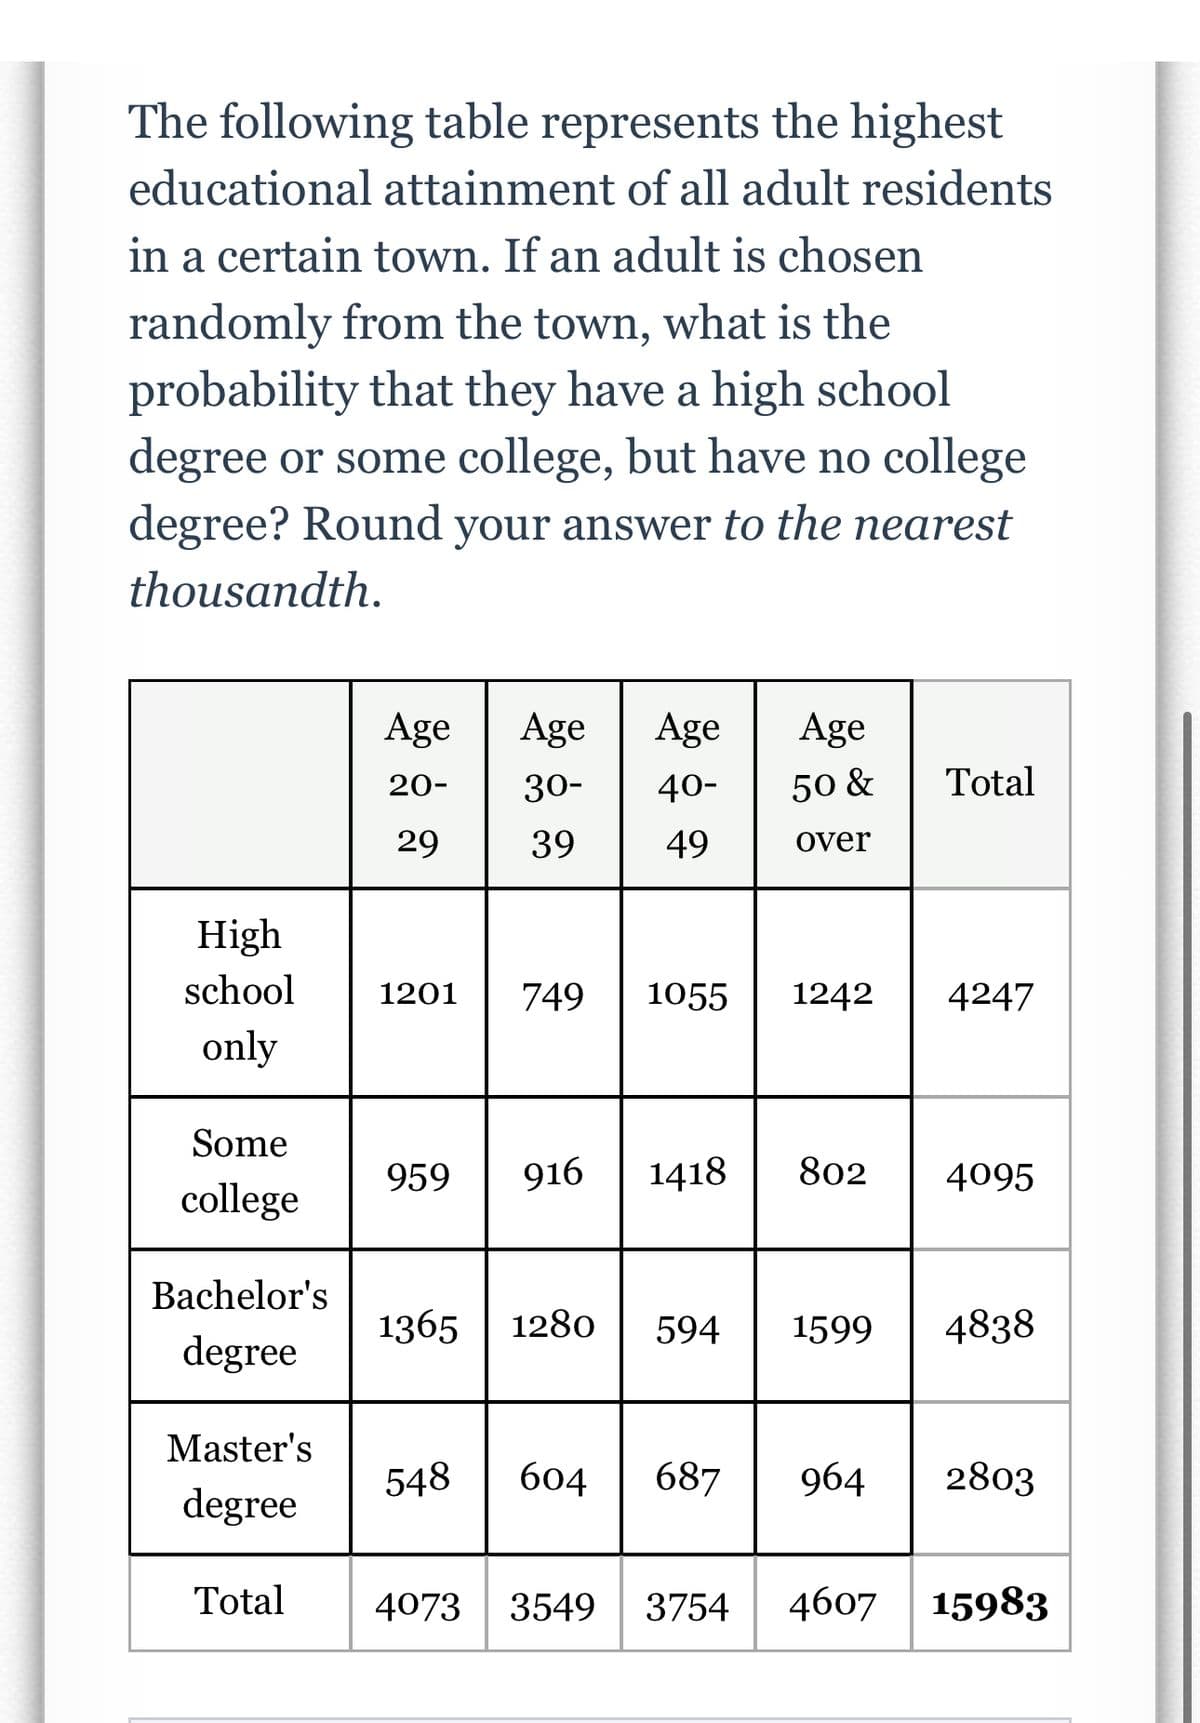 The following table represents the highest
educational attainment of all adult residents
in a certain town. If an adult is chosen
randomly from the town, what is the
probability that they have a high school
degree or some college, but have no college
degree? Round your answer to the nearest
thousandth.
High
school
only
Some
college
Bachelor's
degree
Master's
degree
Total
Age
20-
29
Age Age Age
30- 40-
39
49
1201 749 1055 1242 4247
959 916
50 & Total
over
1418 802
548 604 687
1365 1280 594 1599 4838
4095
964
2803
4073 3549 3754 4607 15983